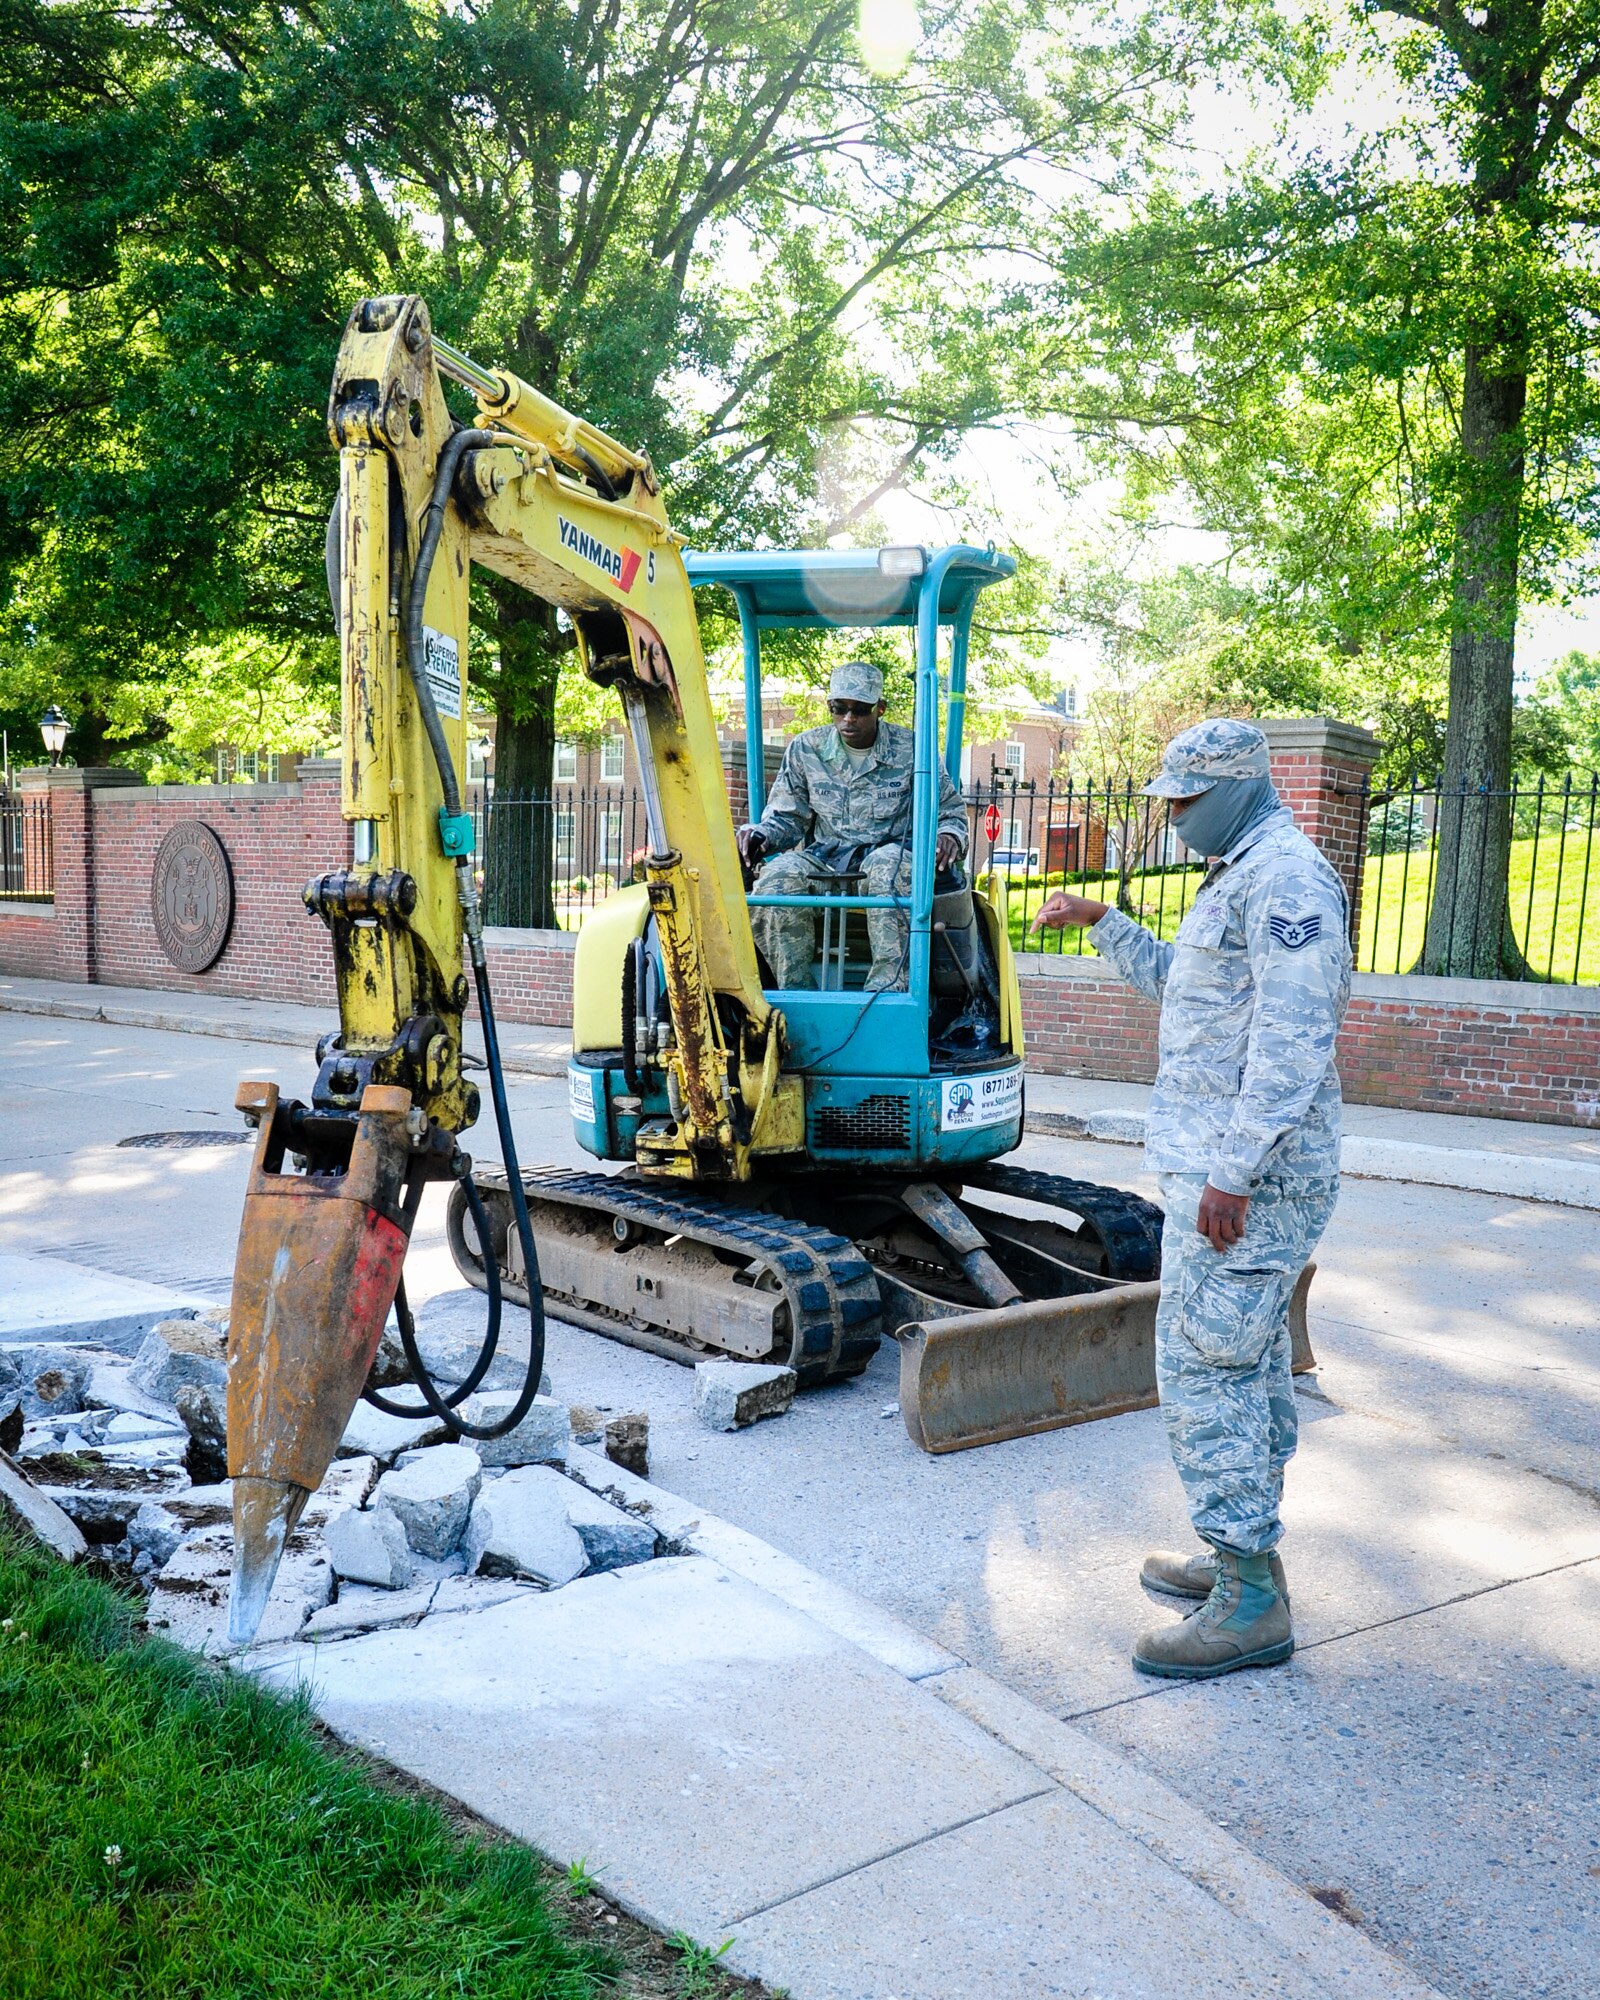 113th Civil Engineer Squadron Heavy Equipment Operators Staff Sgt. Keenan Willis and Airman 1st Class Timothy Blake replace an old section of sidewalk during a deployment for training to the U.S Coast Guard Academy.  (U.S. Air National Guard photo by Chief Master Sgt. Andrew Baker)